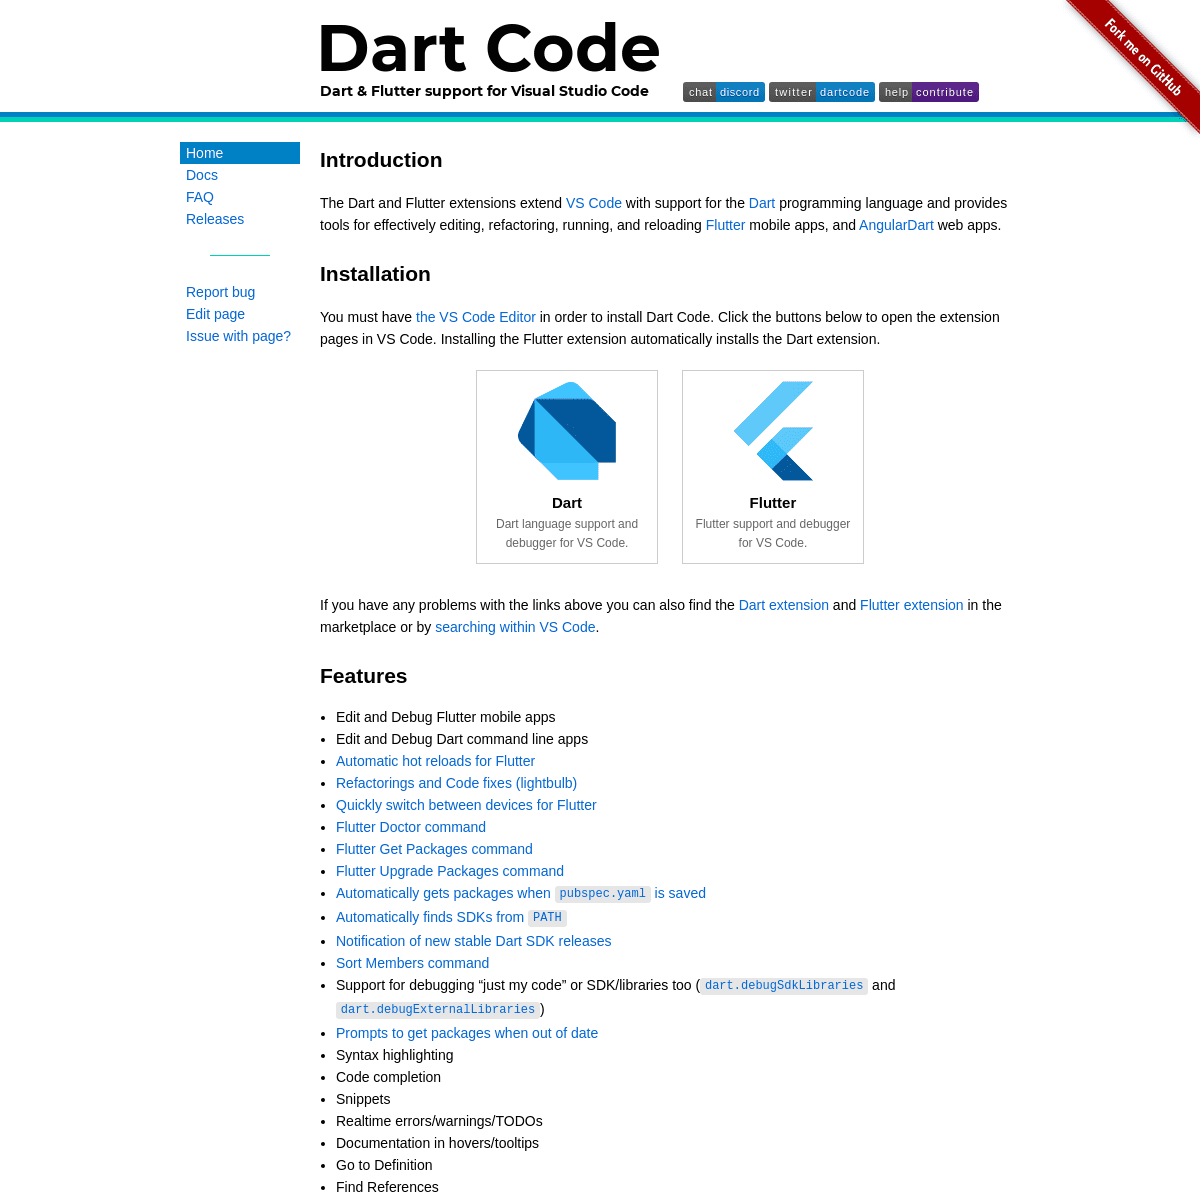 A complete backup of dartcode.org